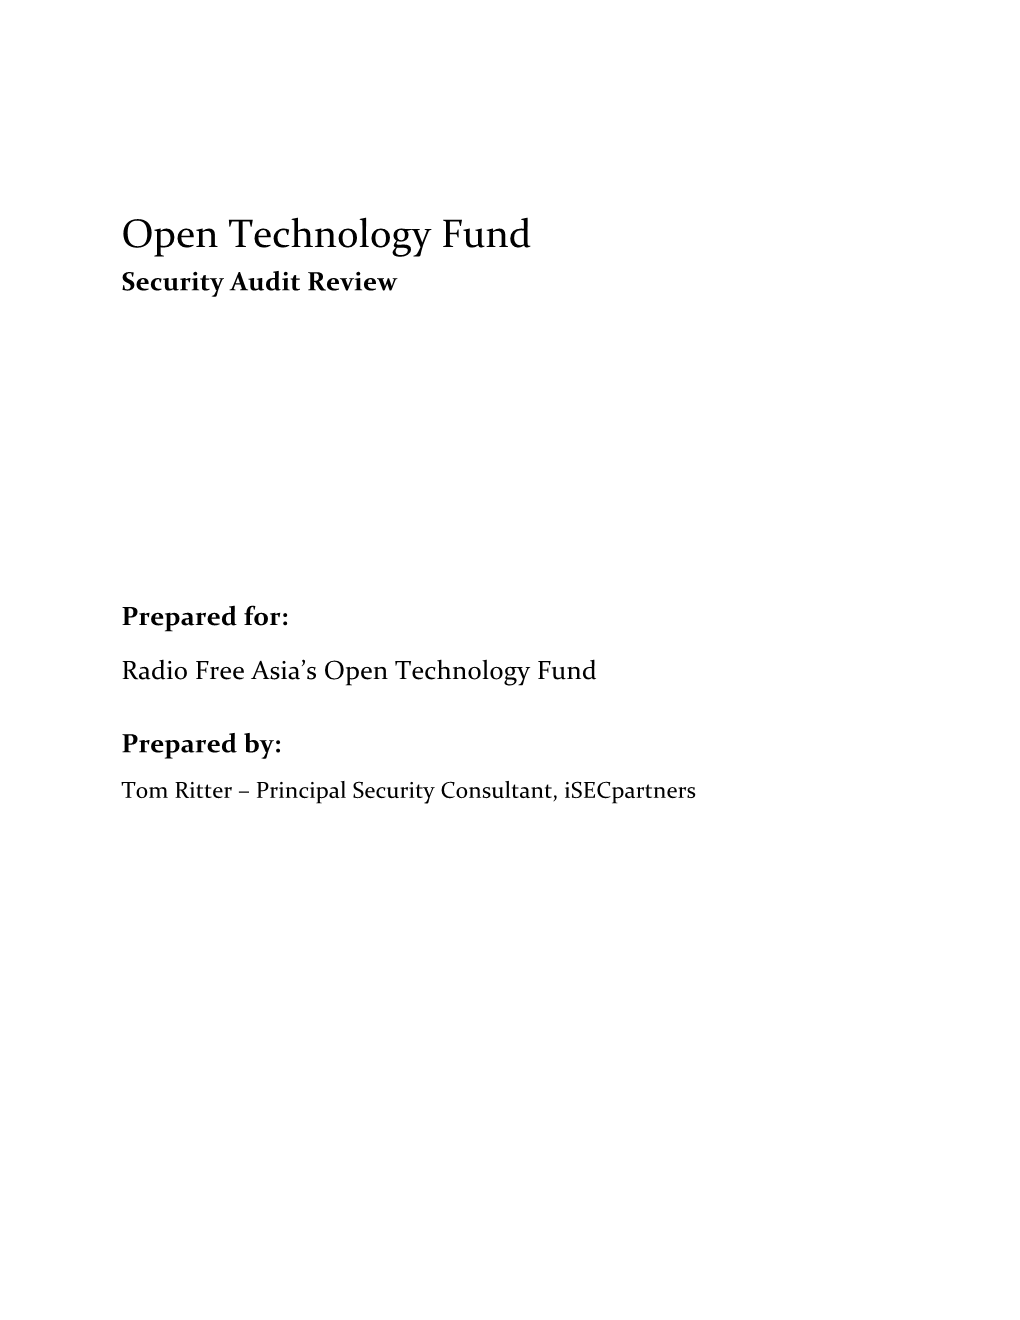 Open Technology Fund Security Audit Review